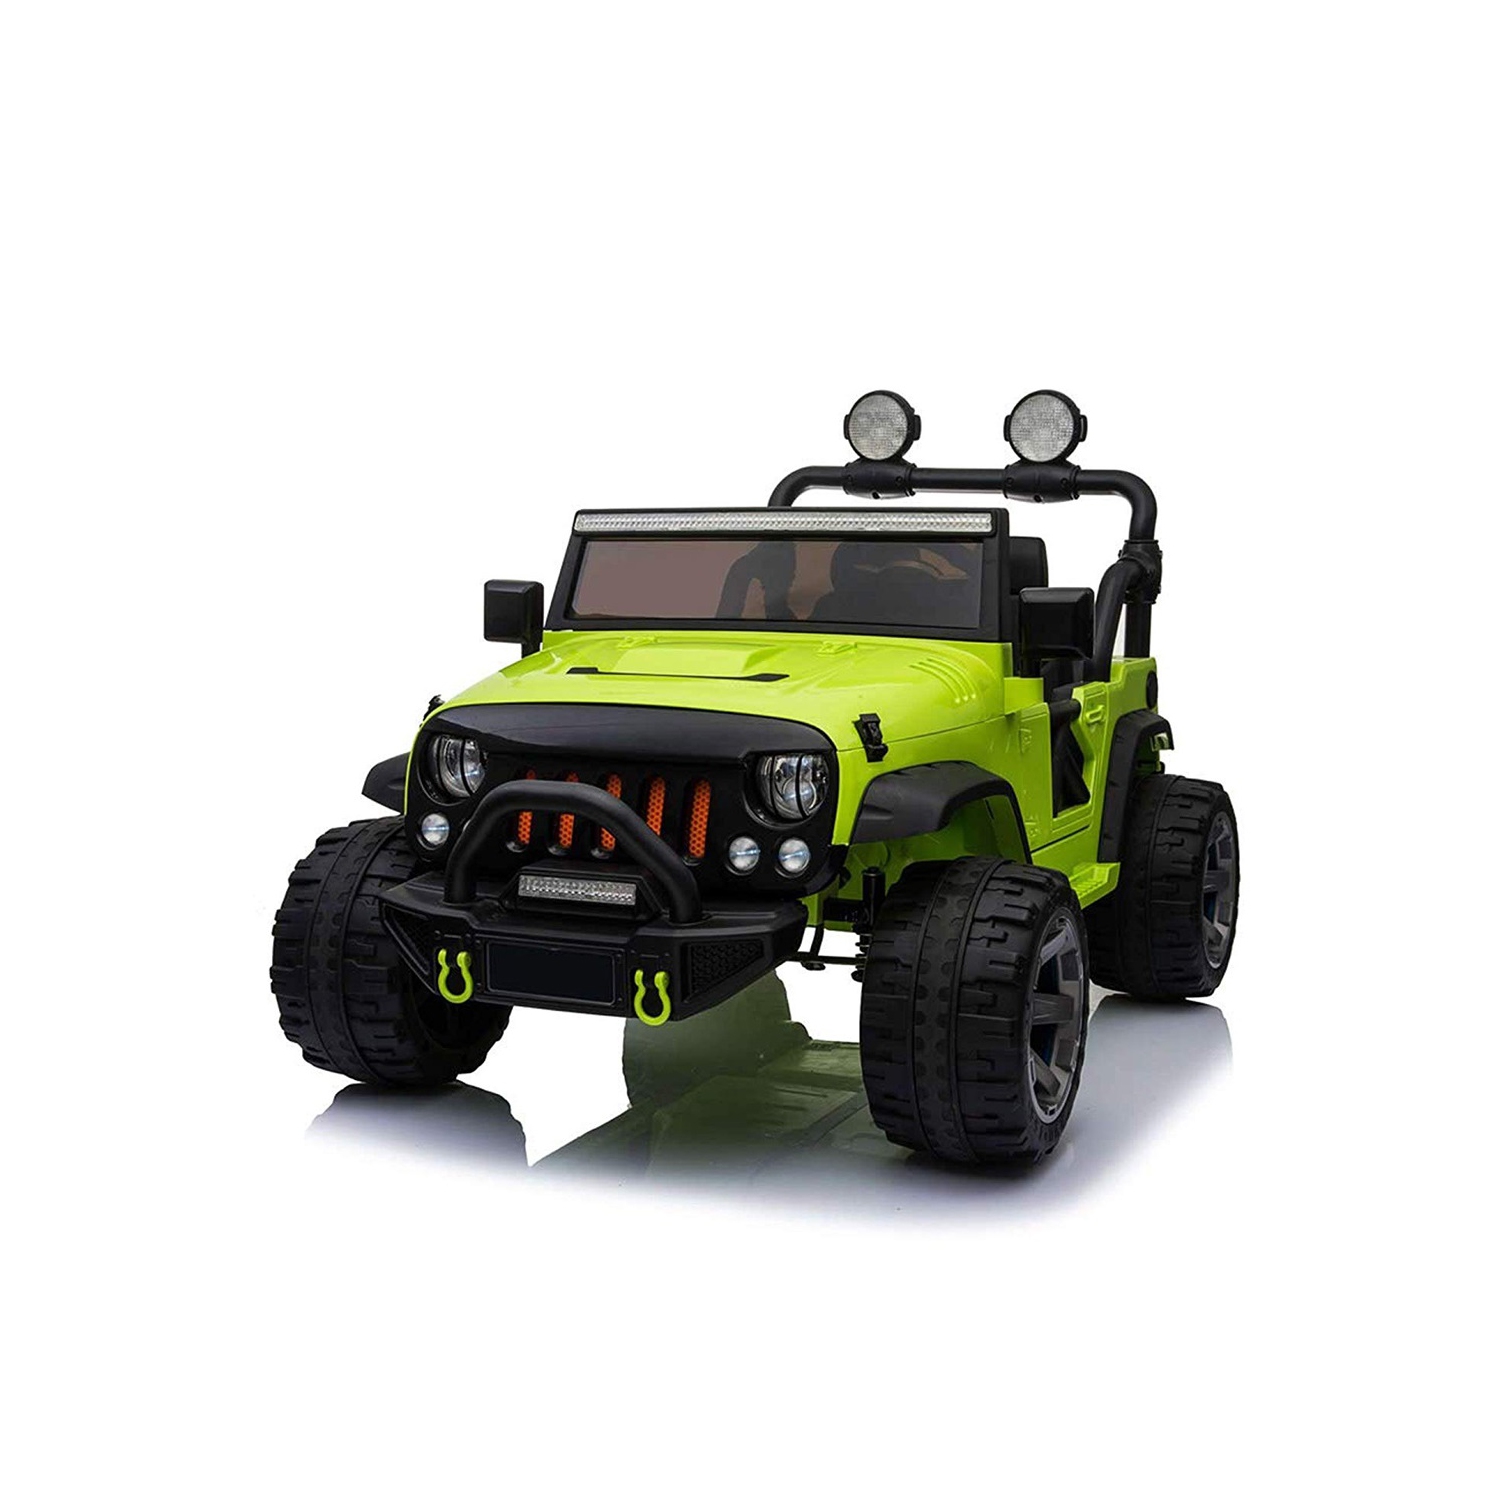 VOLTZ TOYS 2-Seater 12V Ride-on Car for Kids, Realistic Jeep Truck with Full LED Lights, Parental Remote Control, MP3 Player, Leather Seat, EVA Wheels( rubber band) and Multi-Speed Selection (Green)